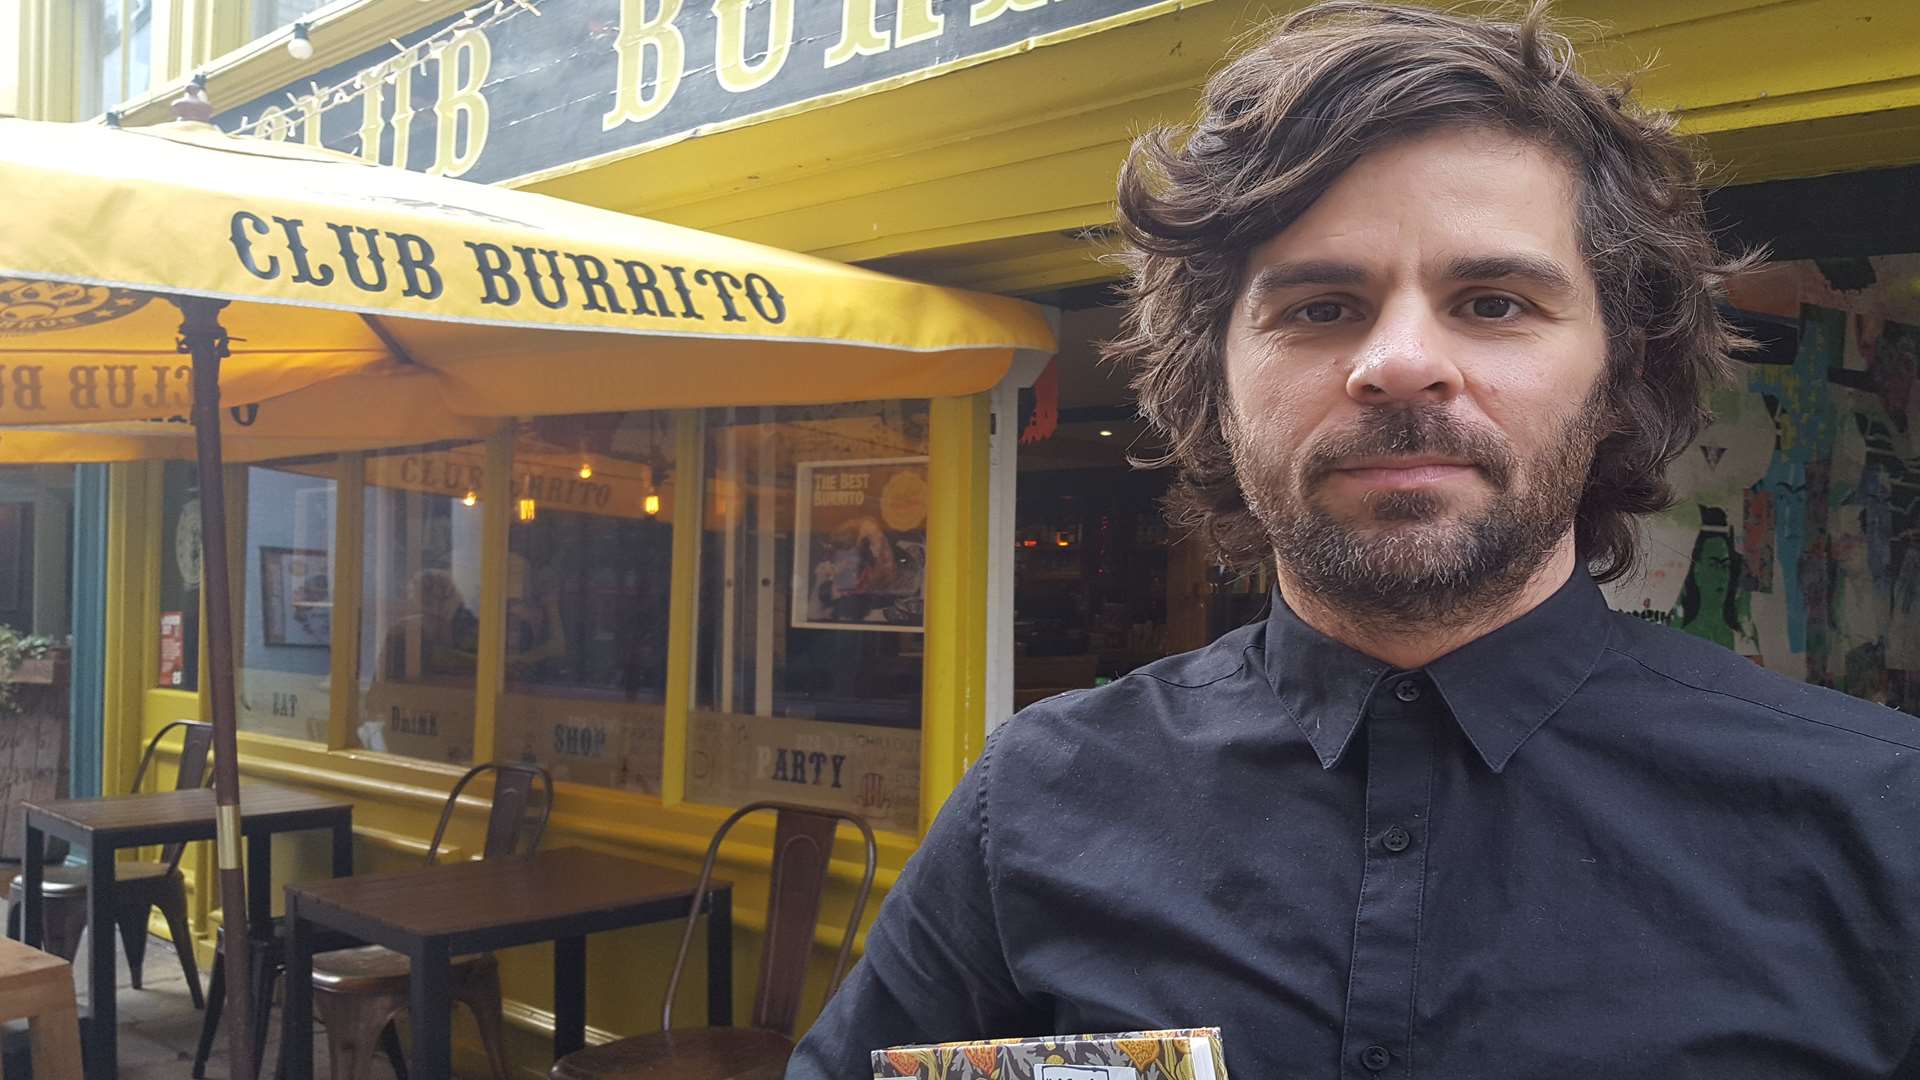 Club Burrito owner Luciano Serrano was said to have 'no idea' about licensing laws